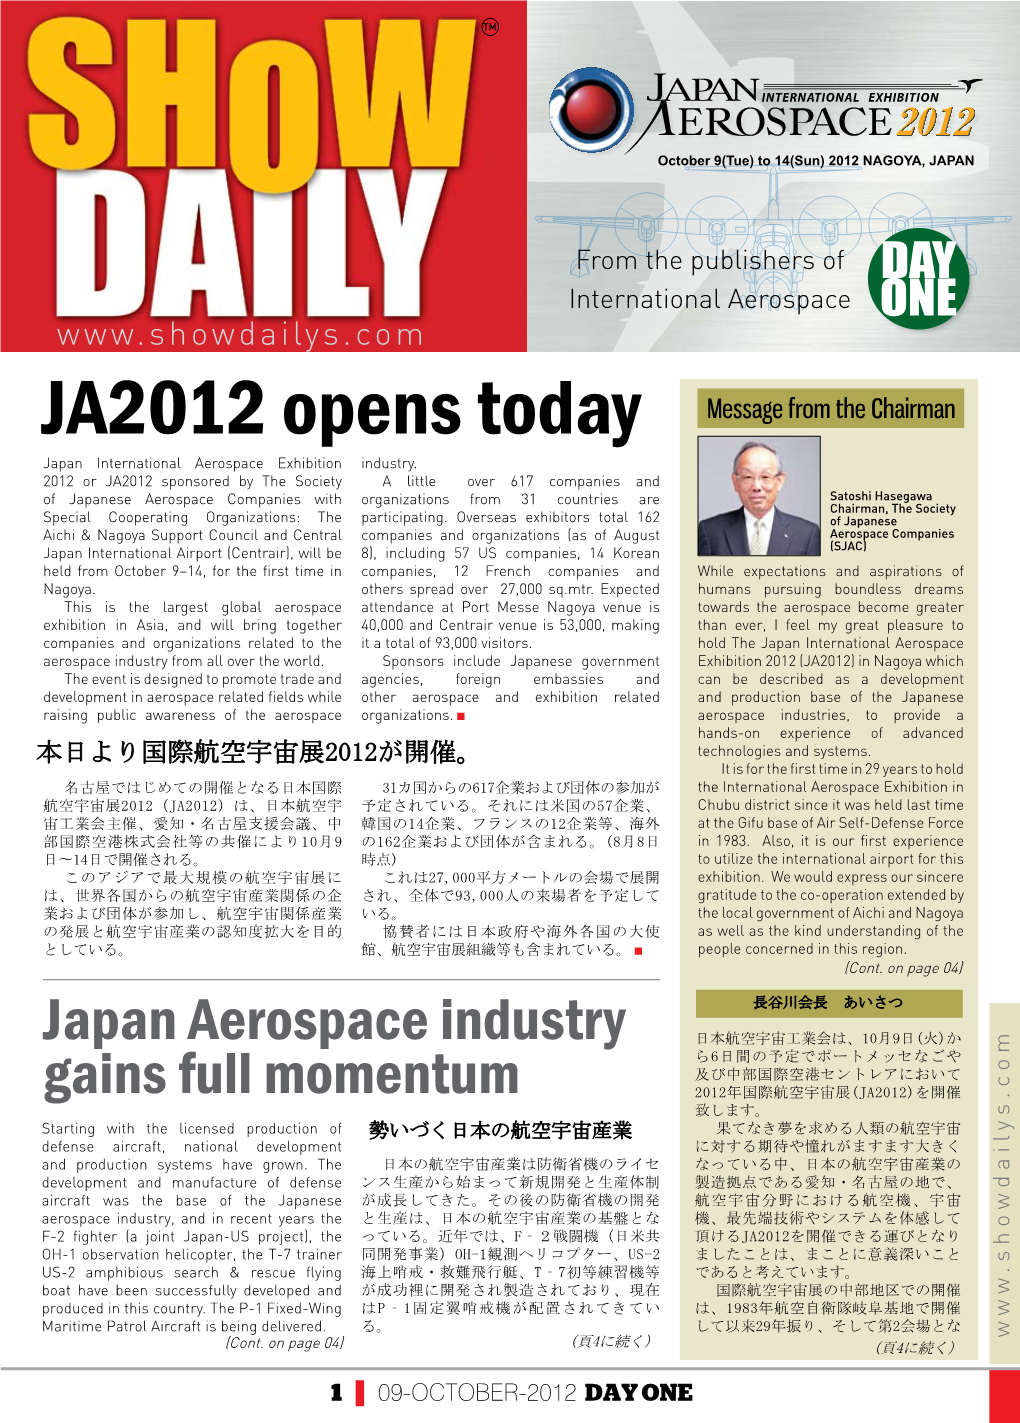 JA2012 Opens Today Maritime Patrol Aircraft Isbeingdelivered